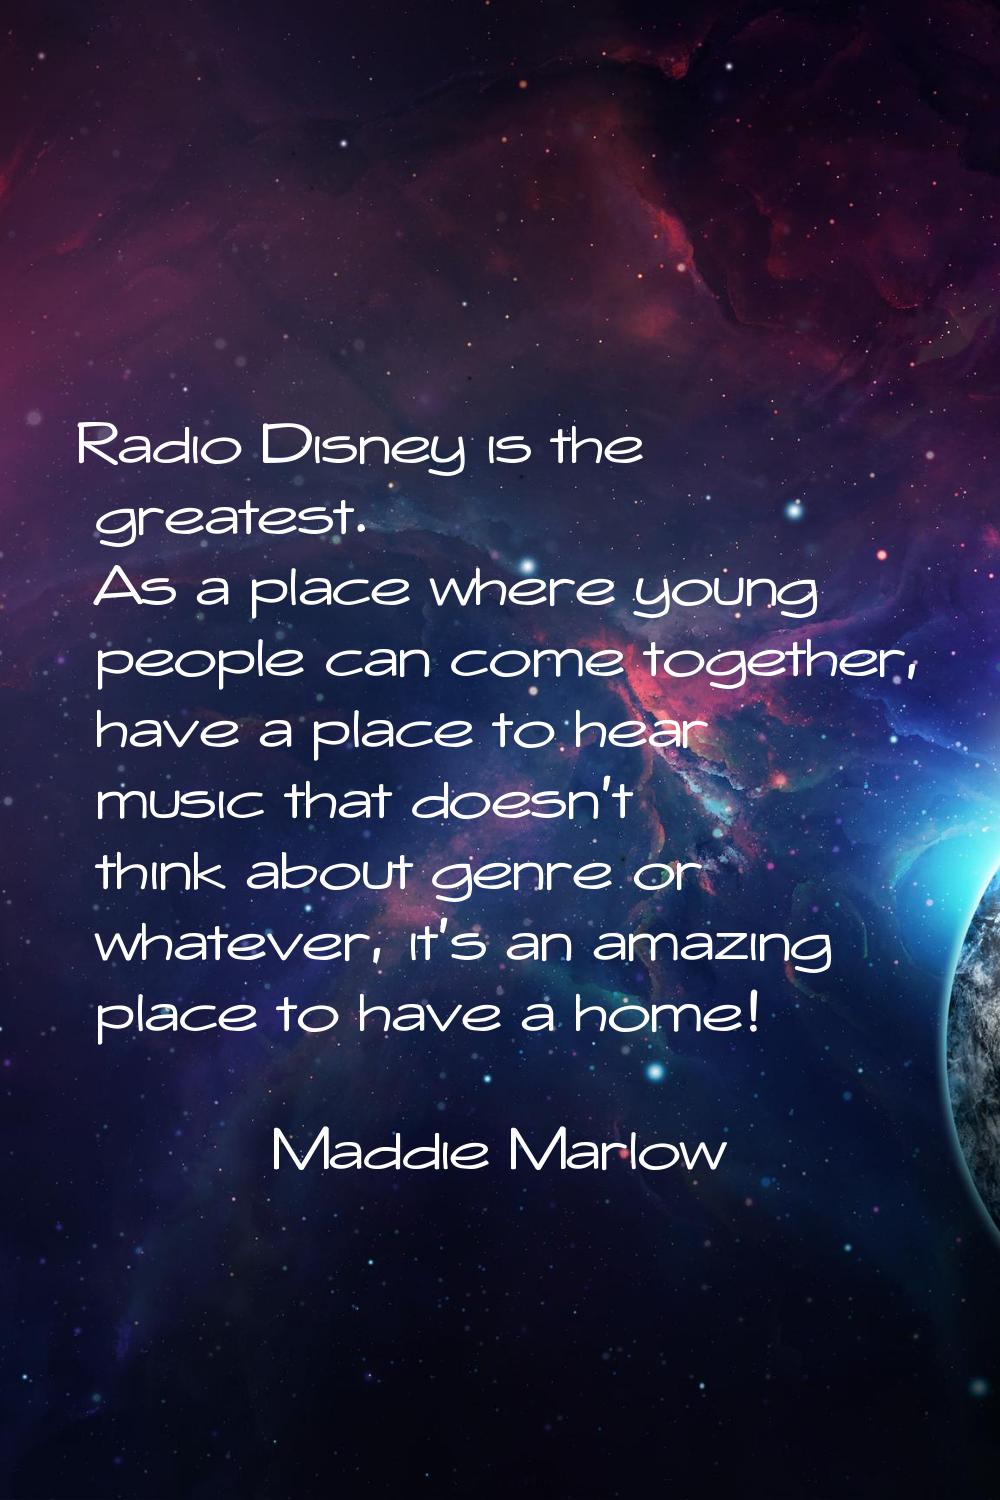 Radio Disney is the greatest. As a place where young people can come together, have a place to hear